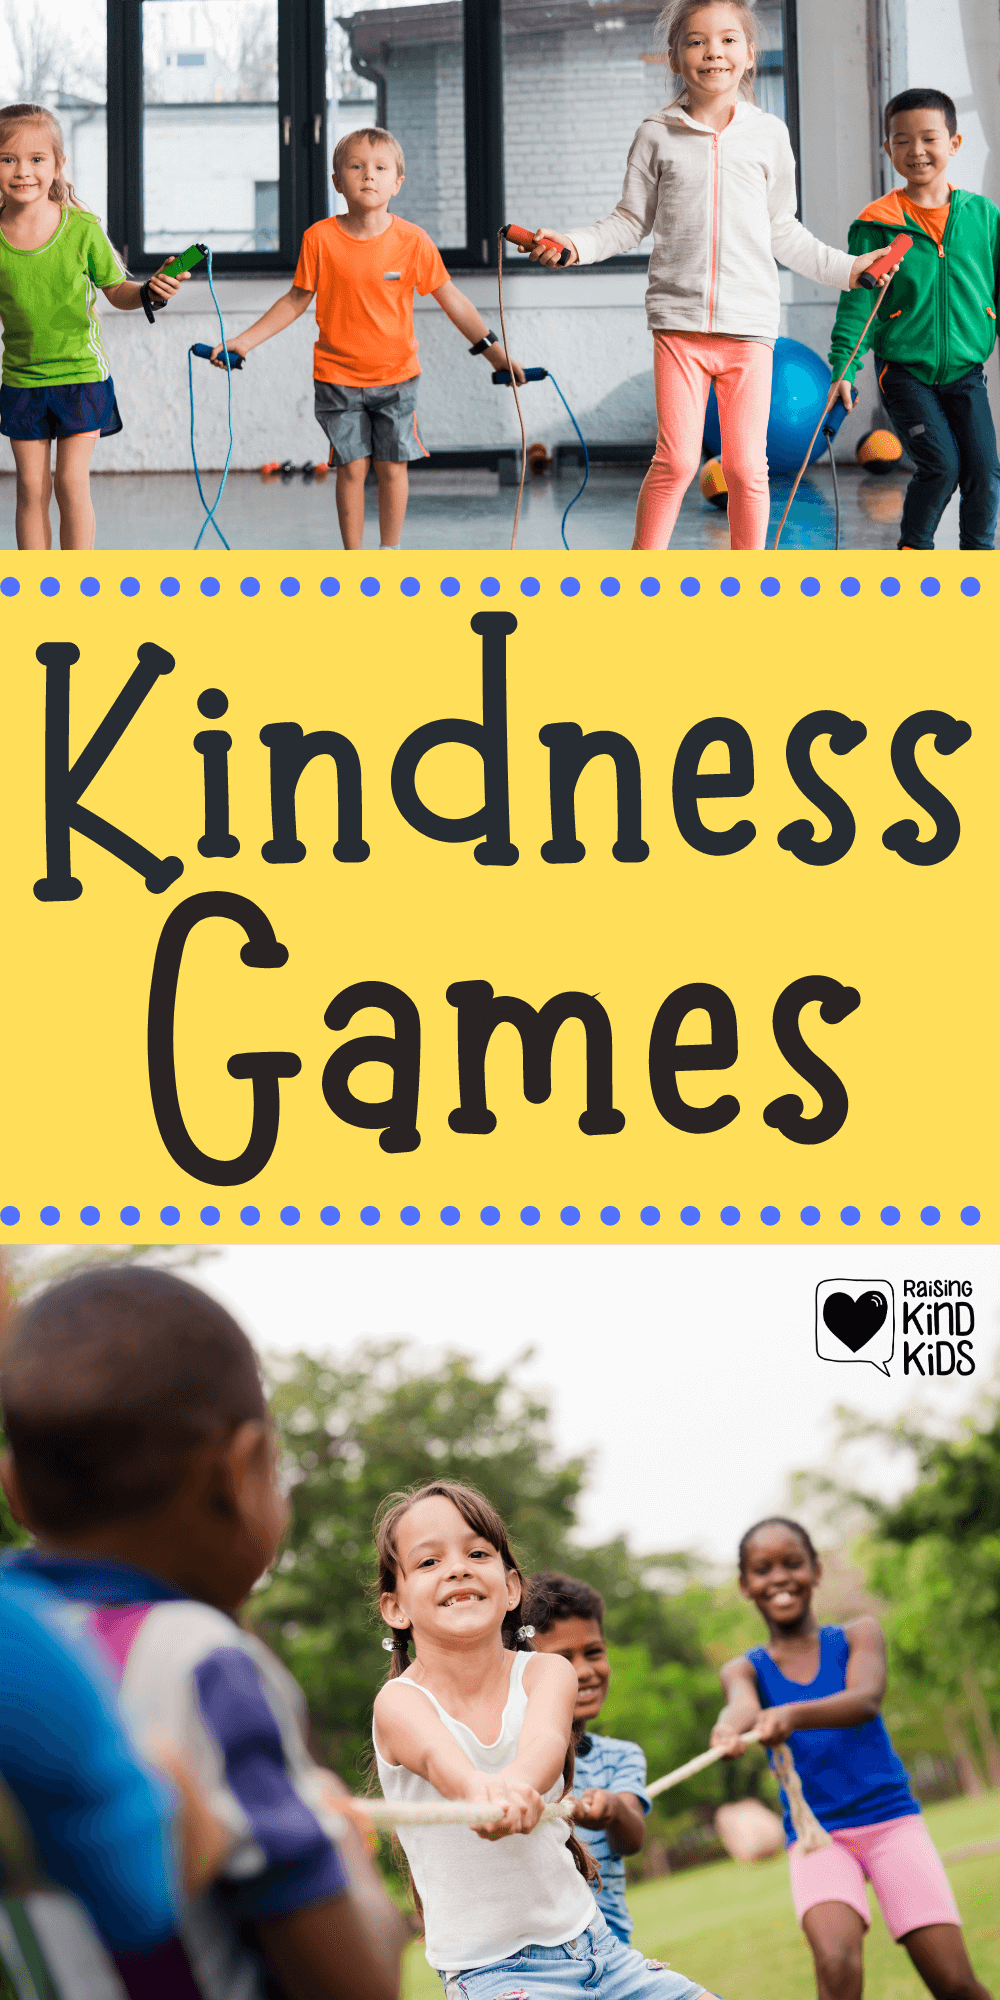 Use these kindness games kids love to play that also teach and reinforce kindness concepts and sel curriculum. They're great for gross motor skills!